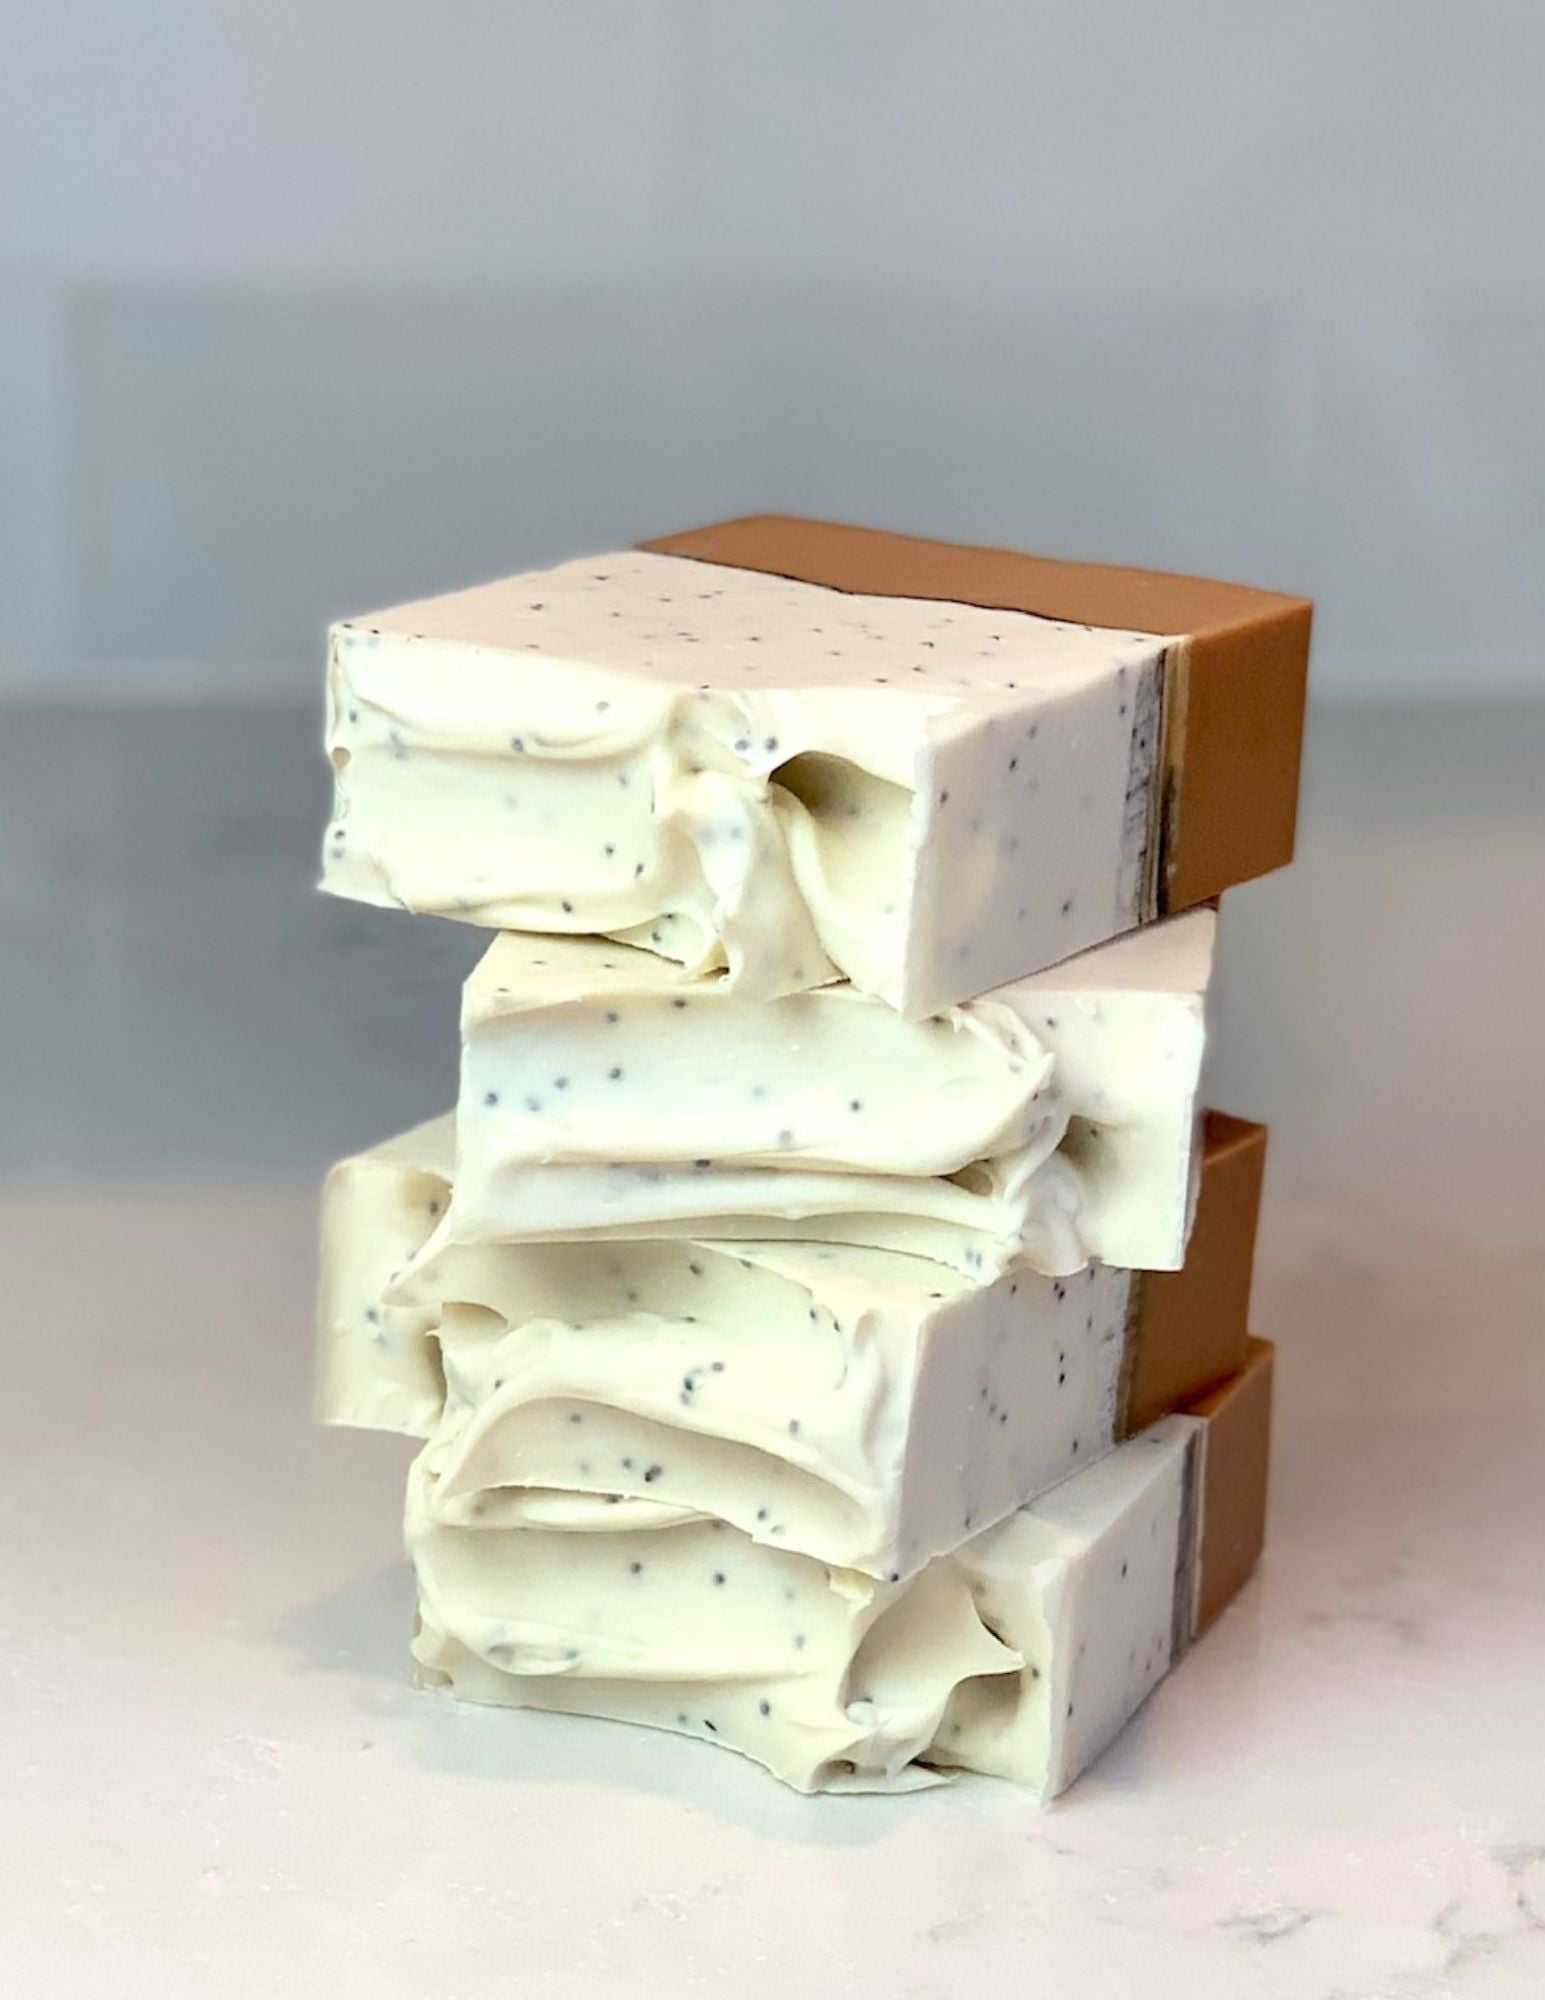 This fun bar of soap features a deep yellow orange bottom layer with a thin line of activated charcoal and a white creamy top with poppy seeds throughout.  Four bars are stacked. They sit on a marble counter with a white background. 